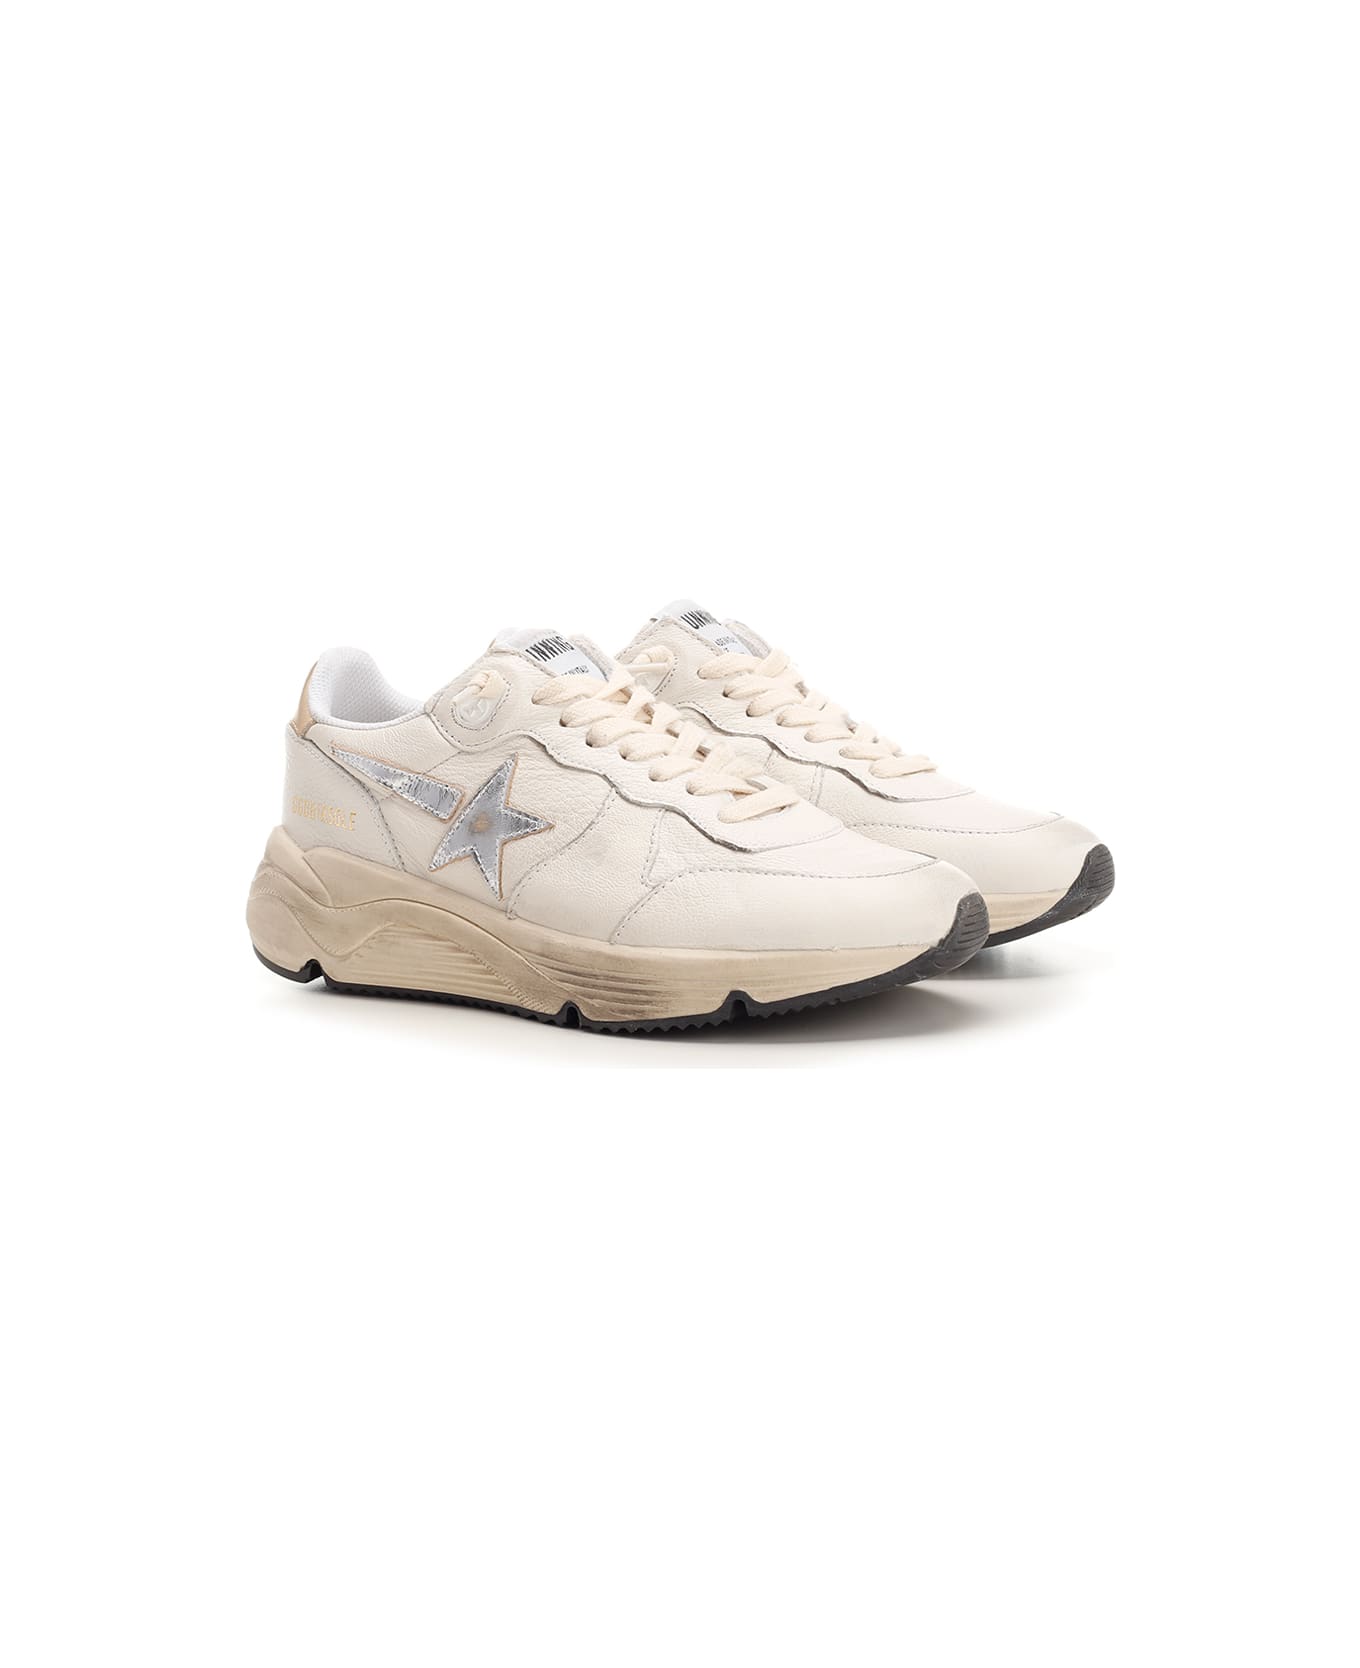 Golden Goose Ivory 'running Sole' Sneakers - WHITE/SILVER/GOLD